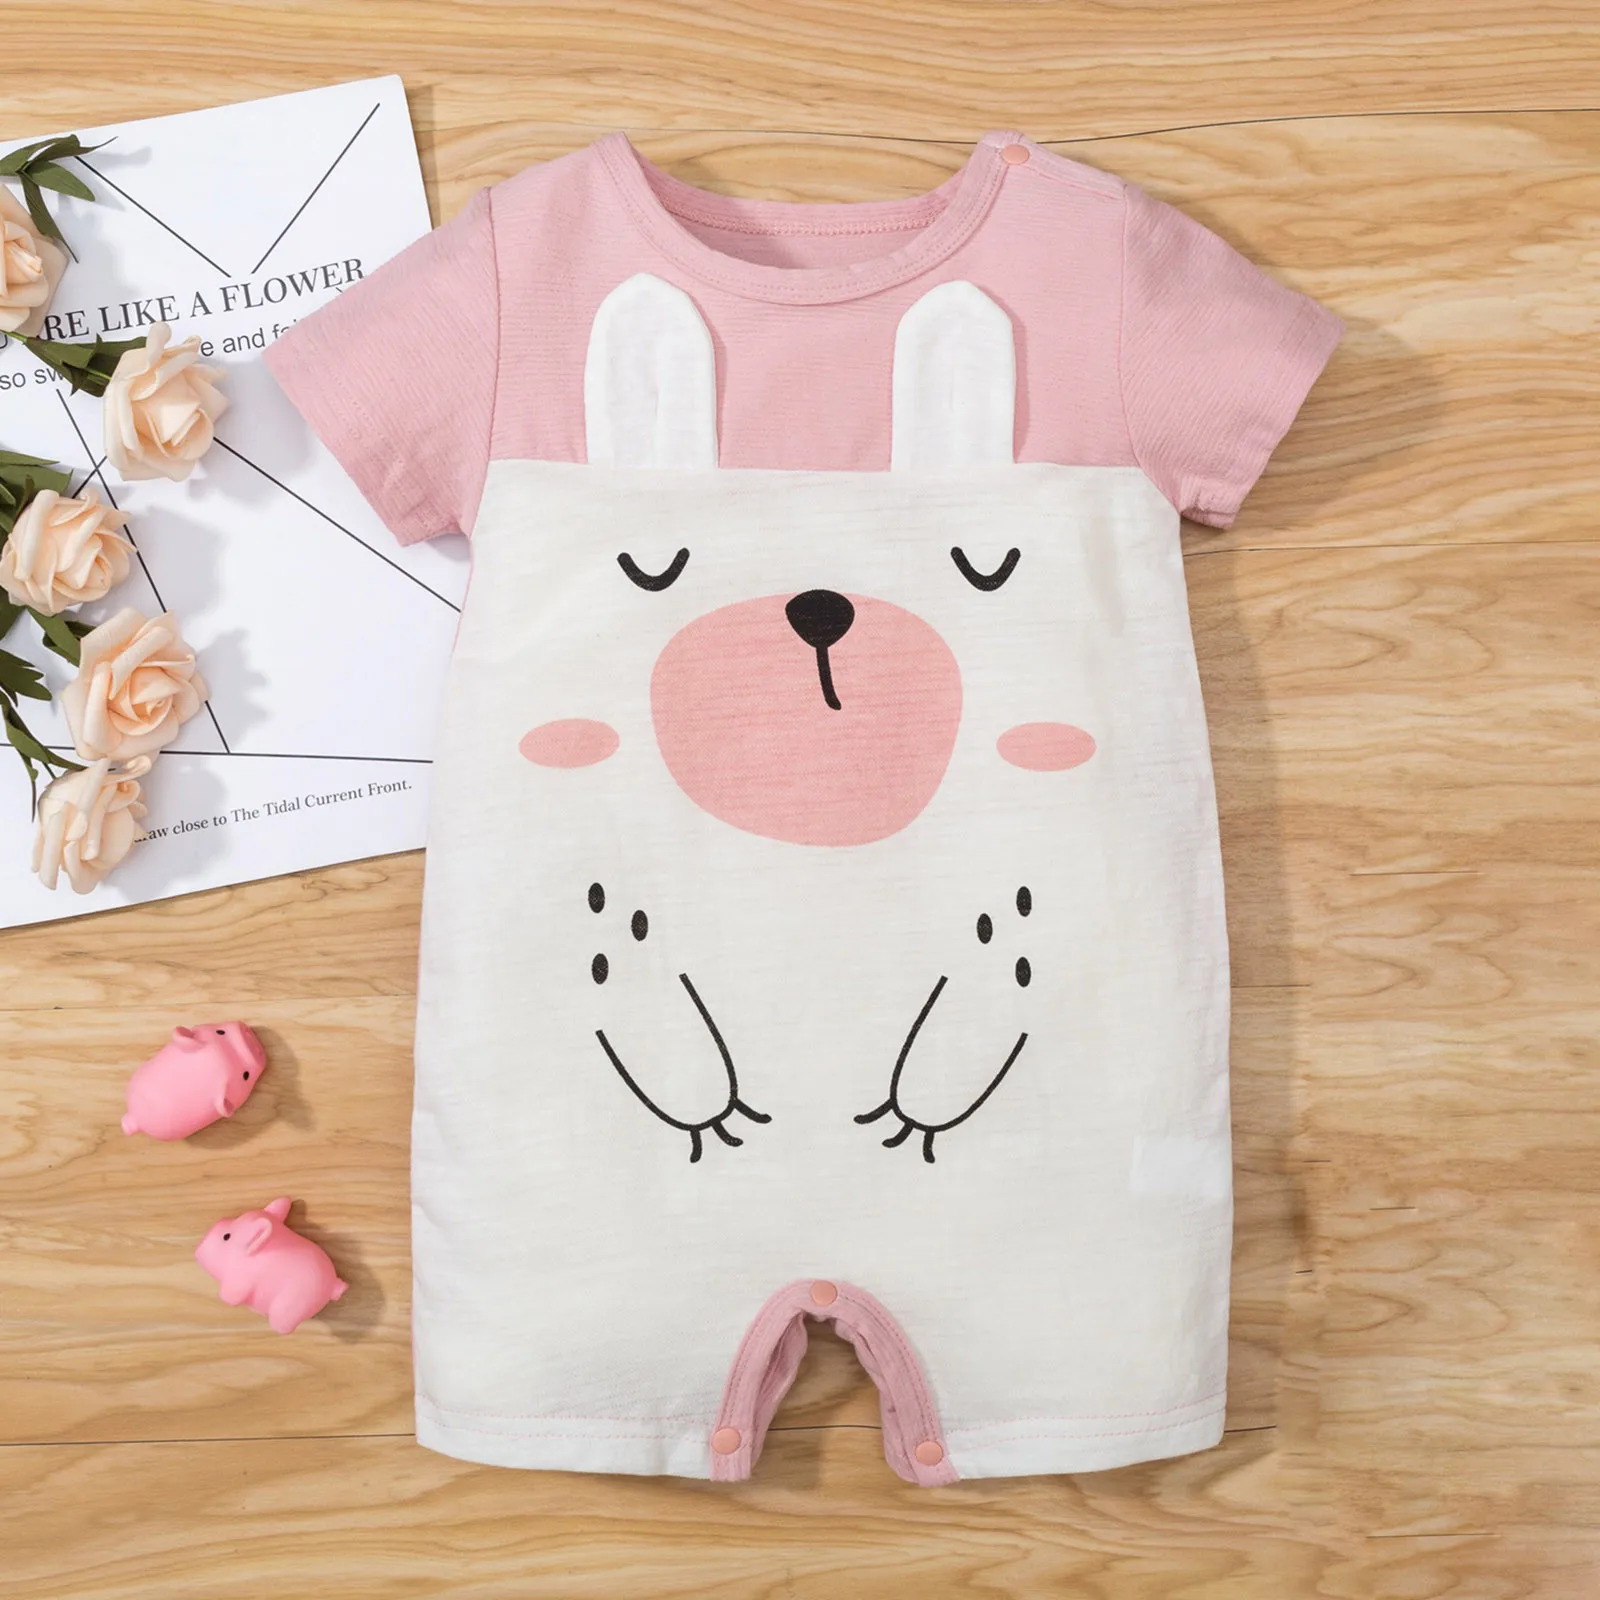 Newborn Baby Clothing 2022 New Fashion Baby Boys Girls Clothes Cartoon Baby Bodysuit Short Sleeve Infant Jumpsuits 0-12 Months baby bodysuit dress Baby Rompers